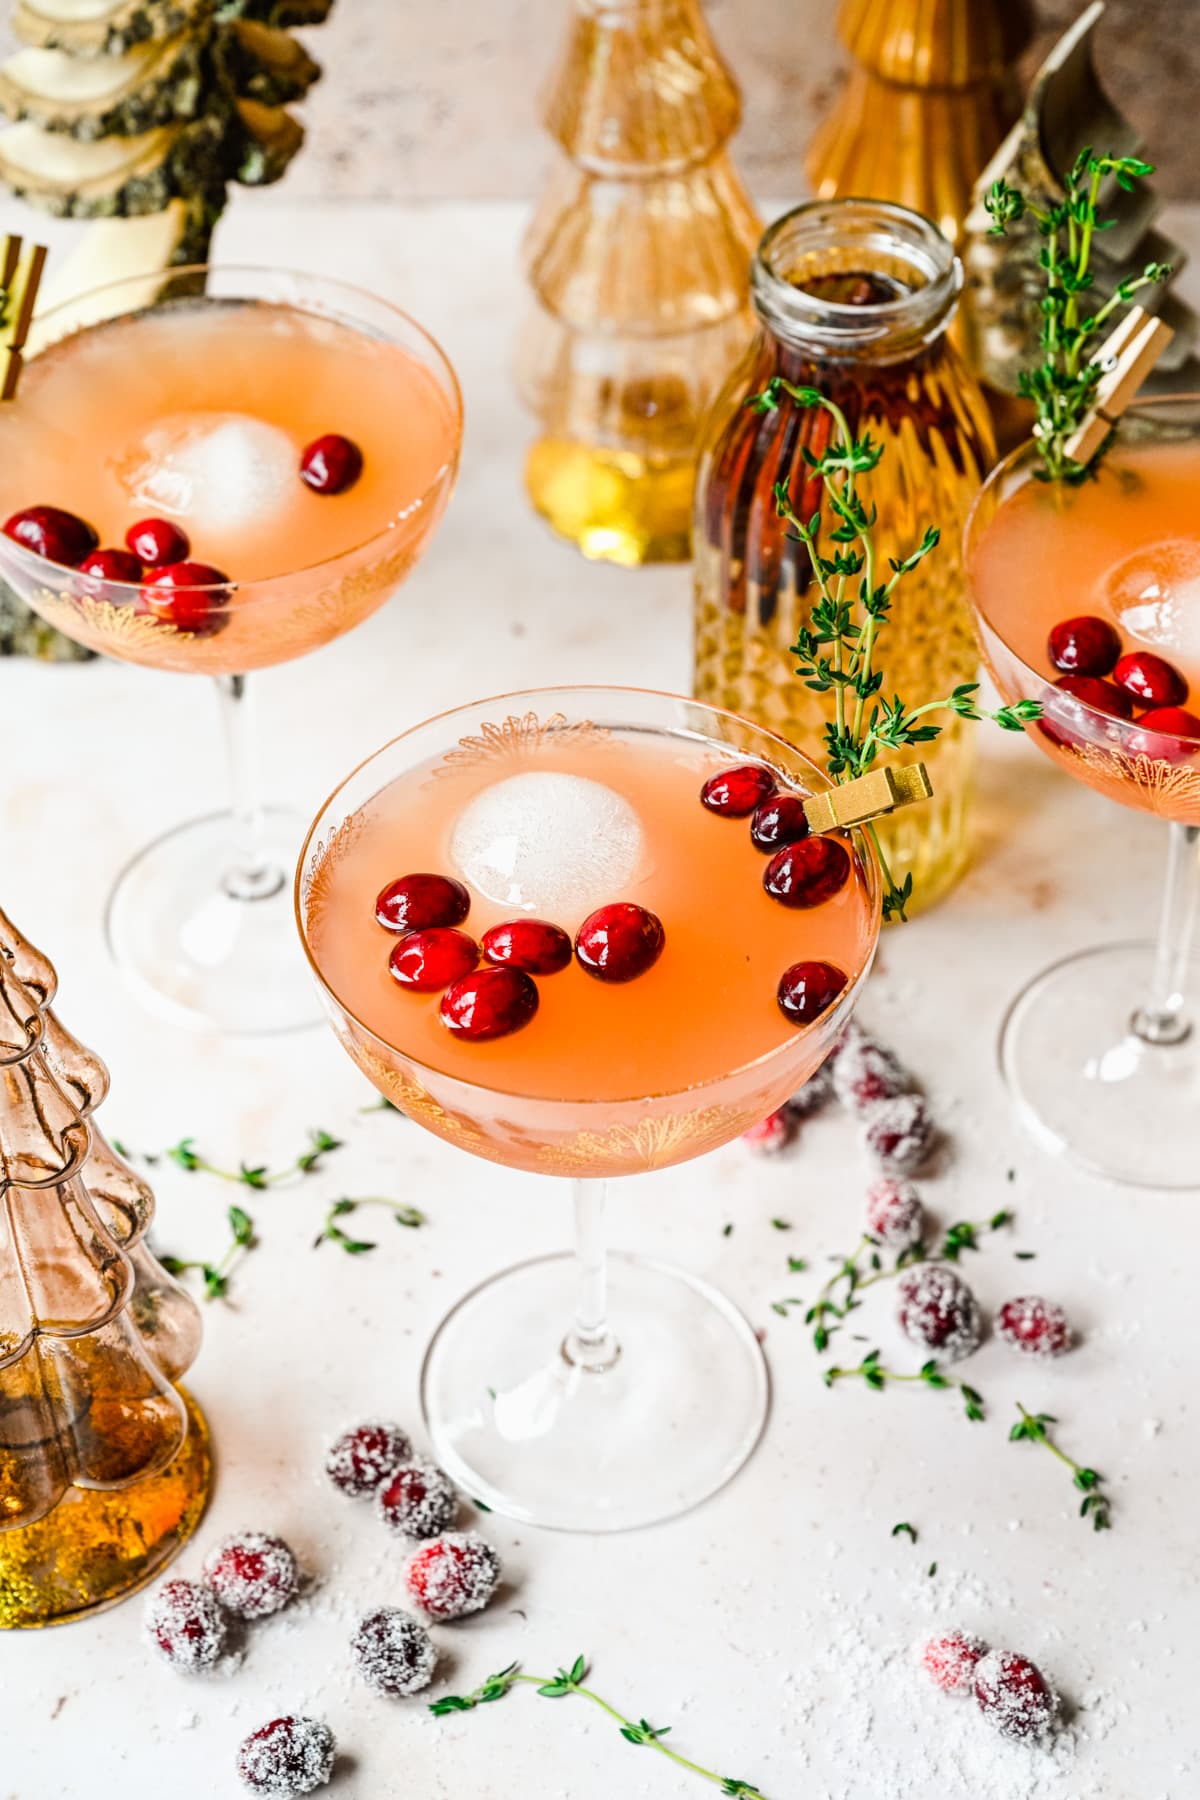 Finished cranberry mocktails in glasses with garnish and festive background.